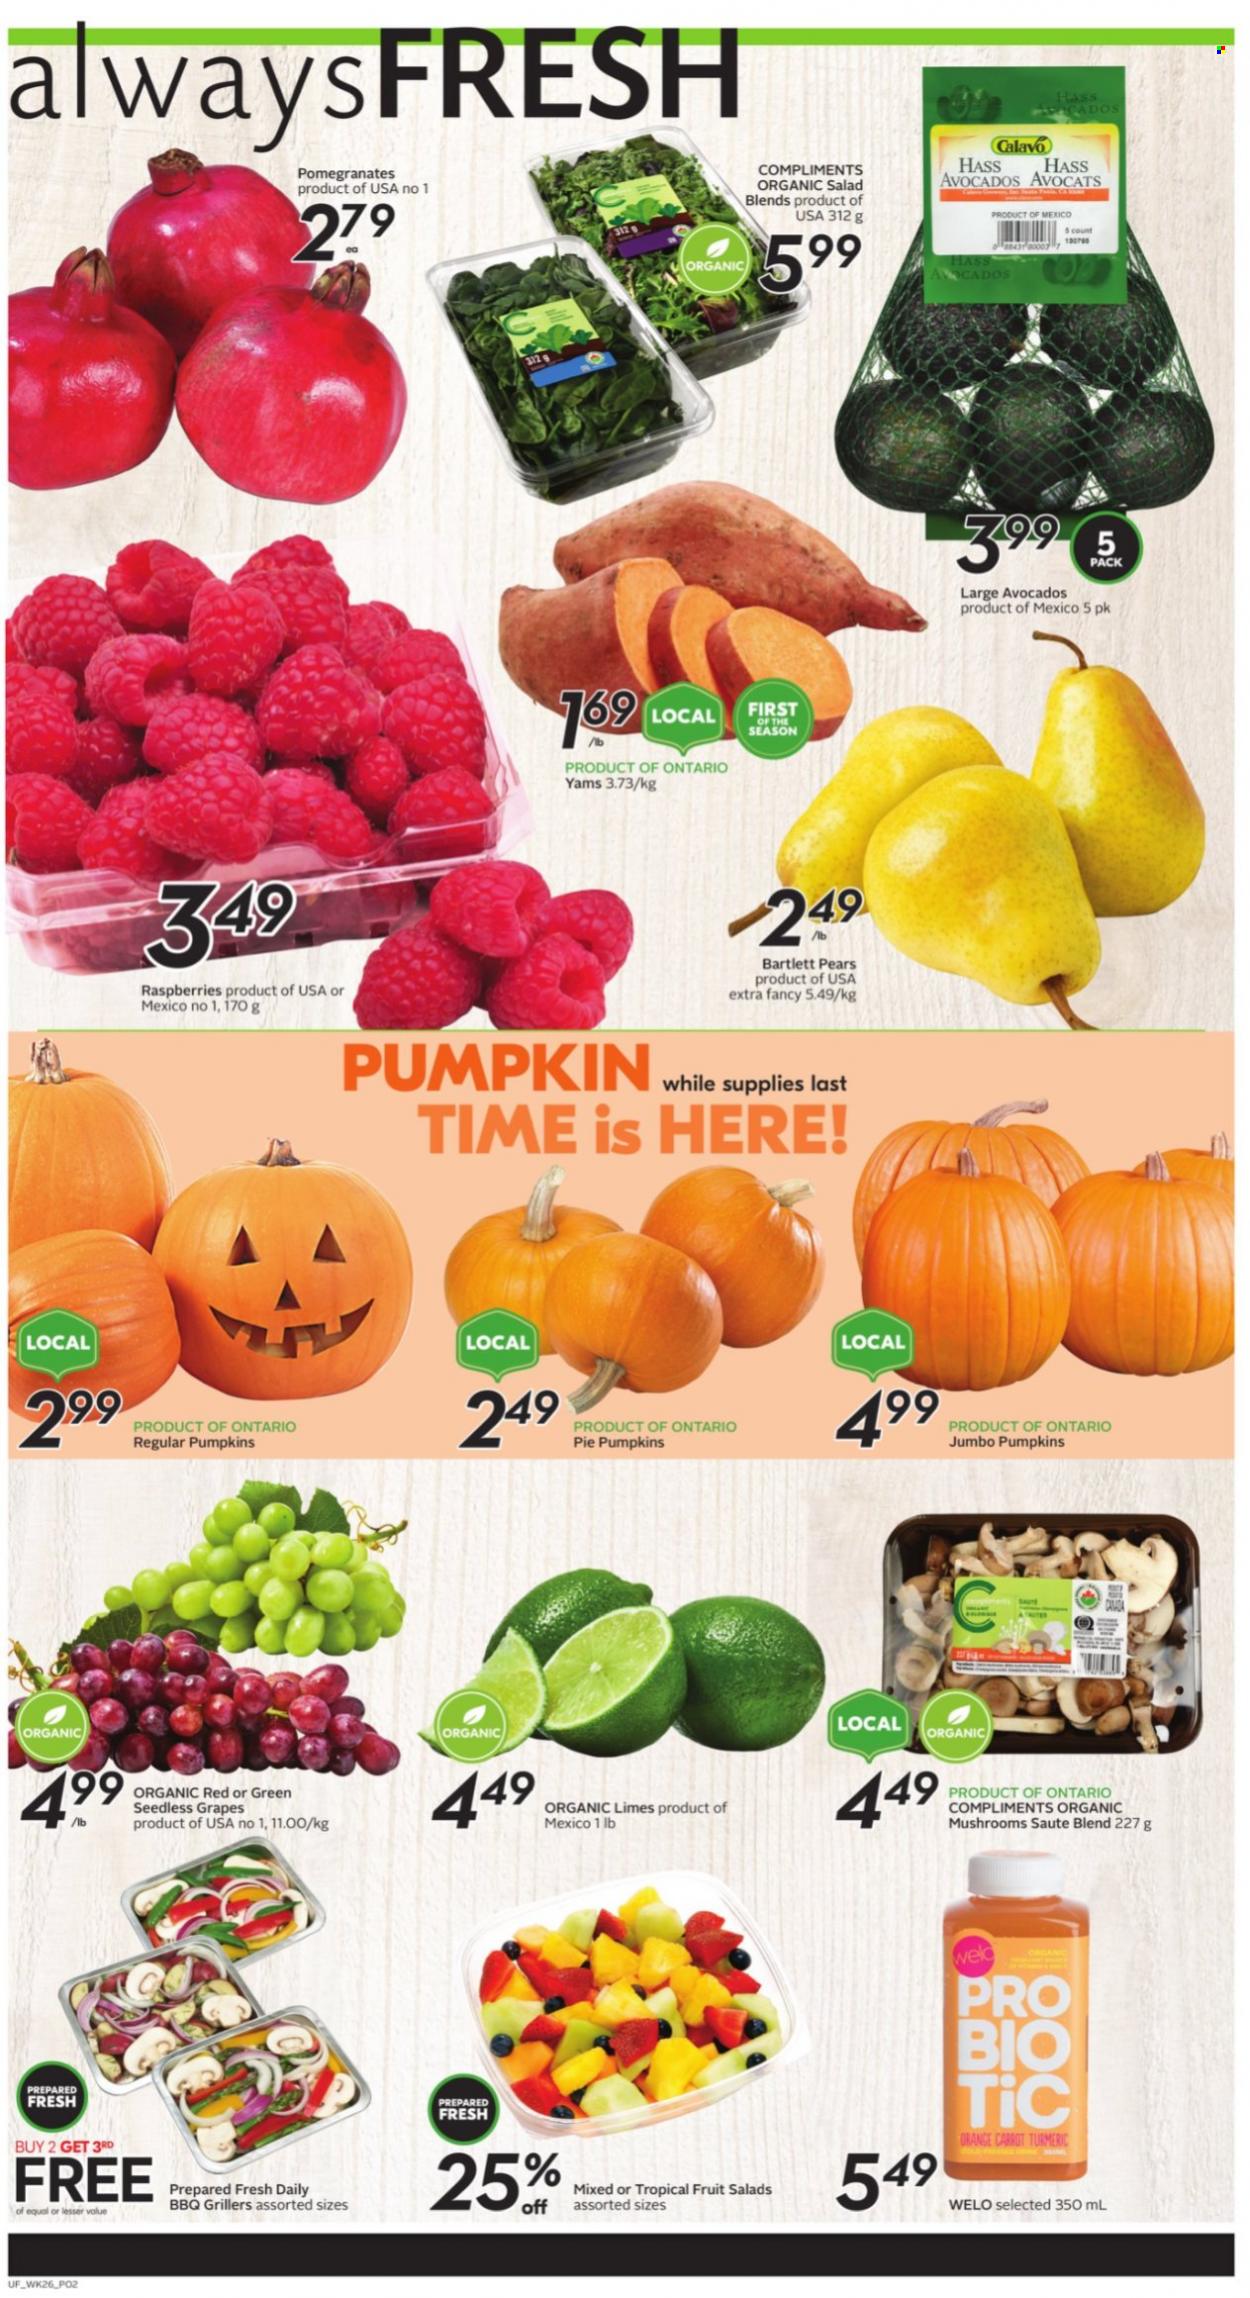 thumbnail - Sobeys Urban Fresh Flyer - October 21, 2021 - October 27, 2021 - Sales products - pie, pumpkin, salad, avocado, Bartlett pears, grapes, limes, seedless grapes, pears, pomegranate, turmeric, oranges. Page 2.